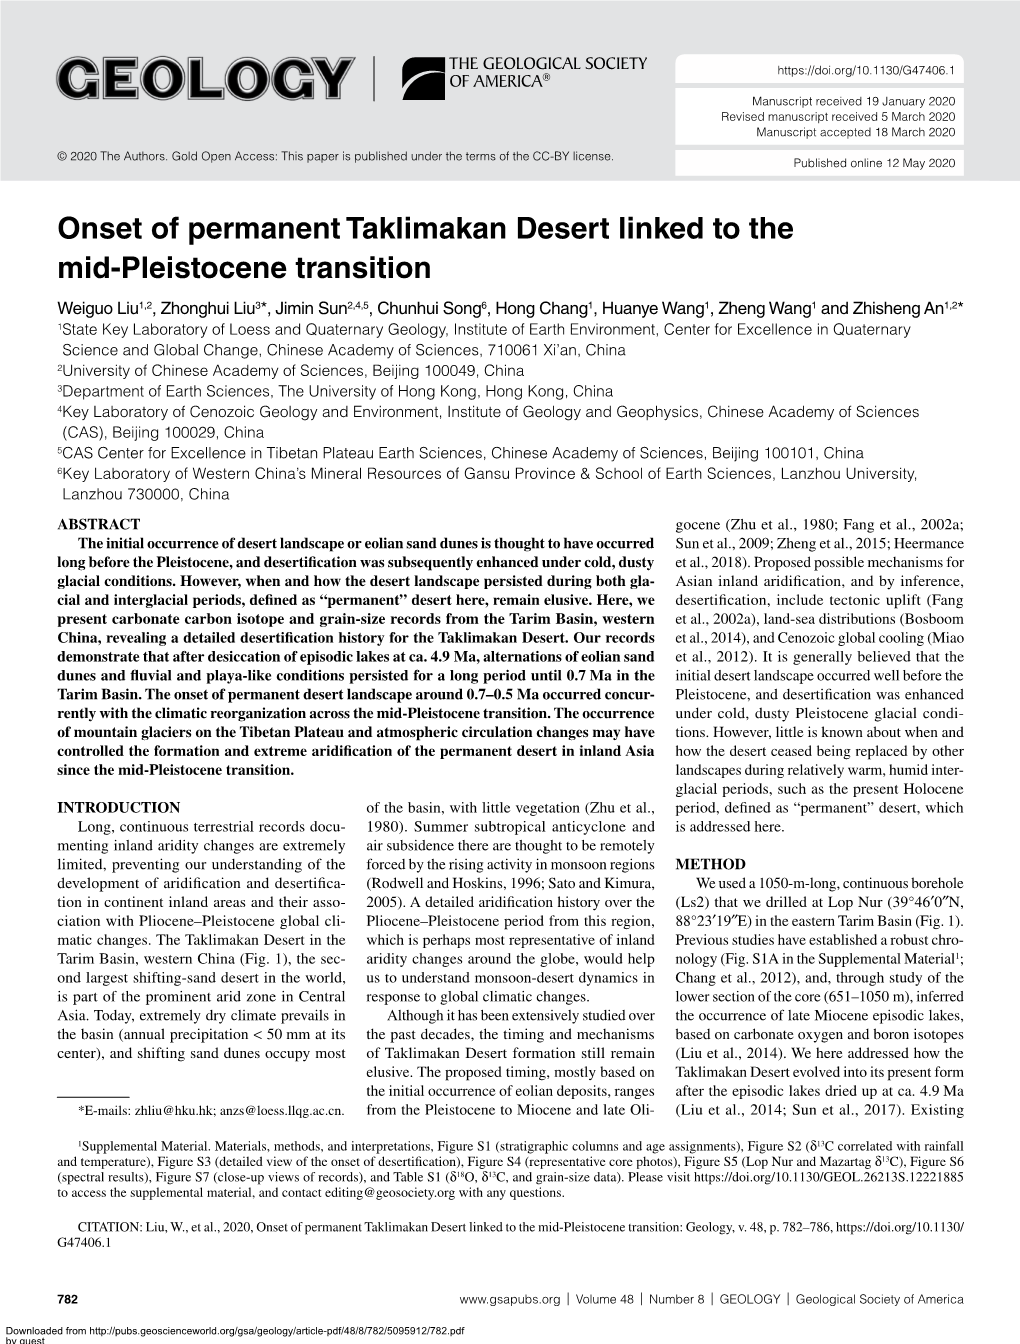 Onset of Permanent Taklimakan Desert Linked to the Mid